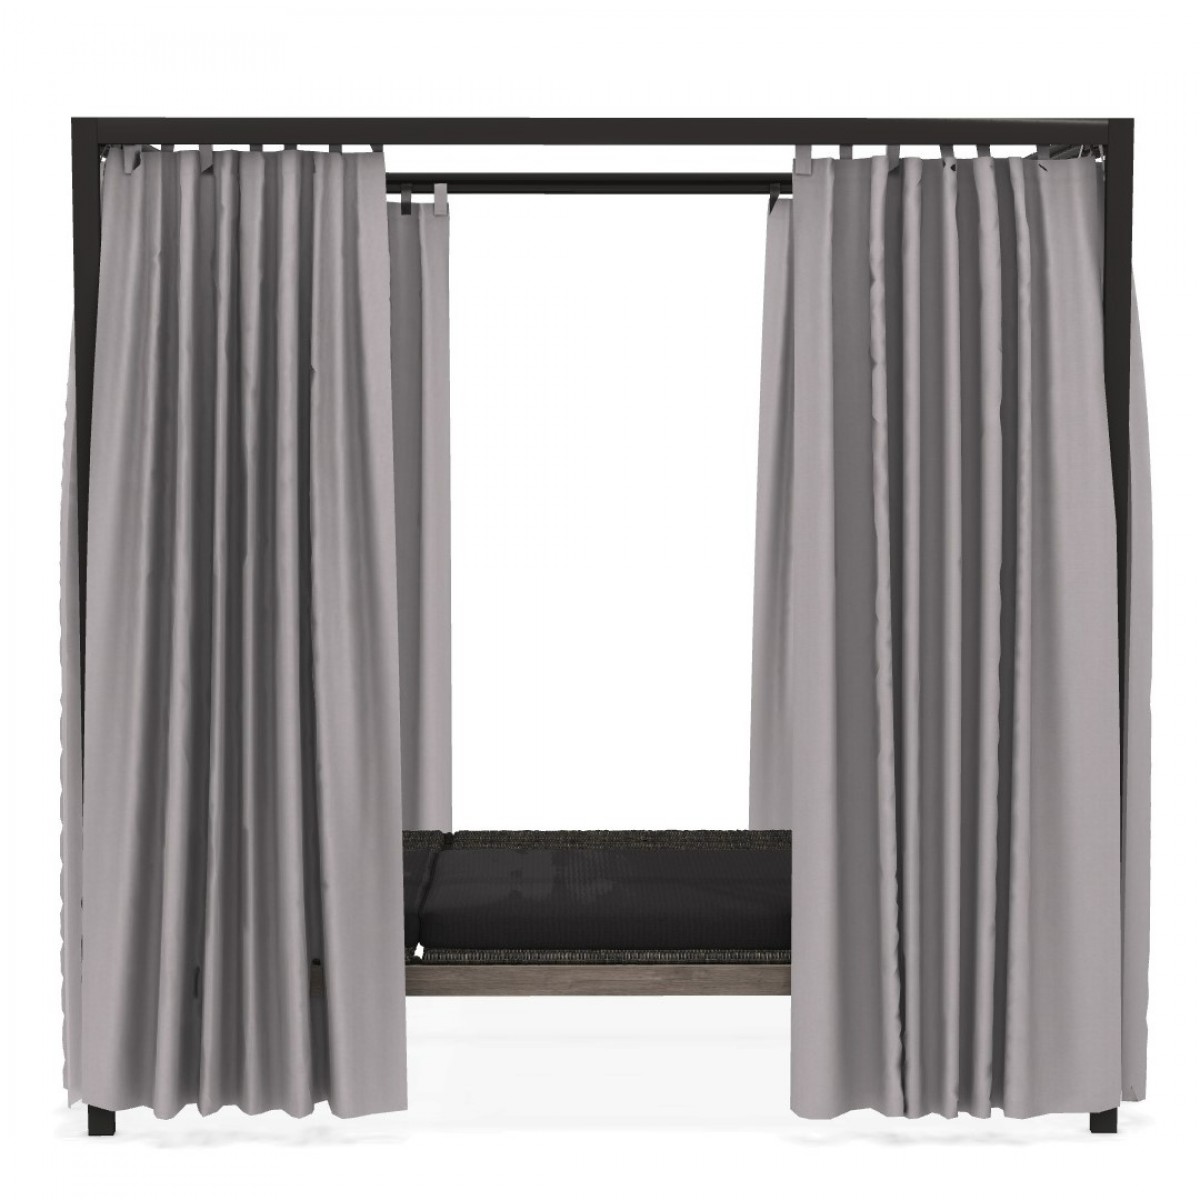 Allaperto Mountain Lounge Bed with Curtain